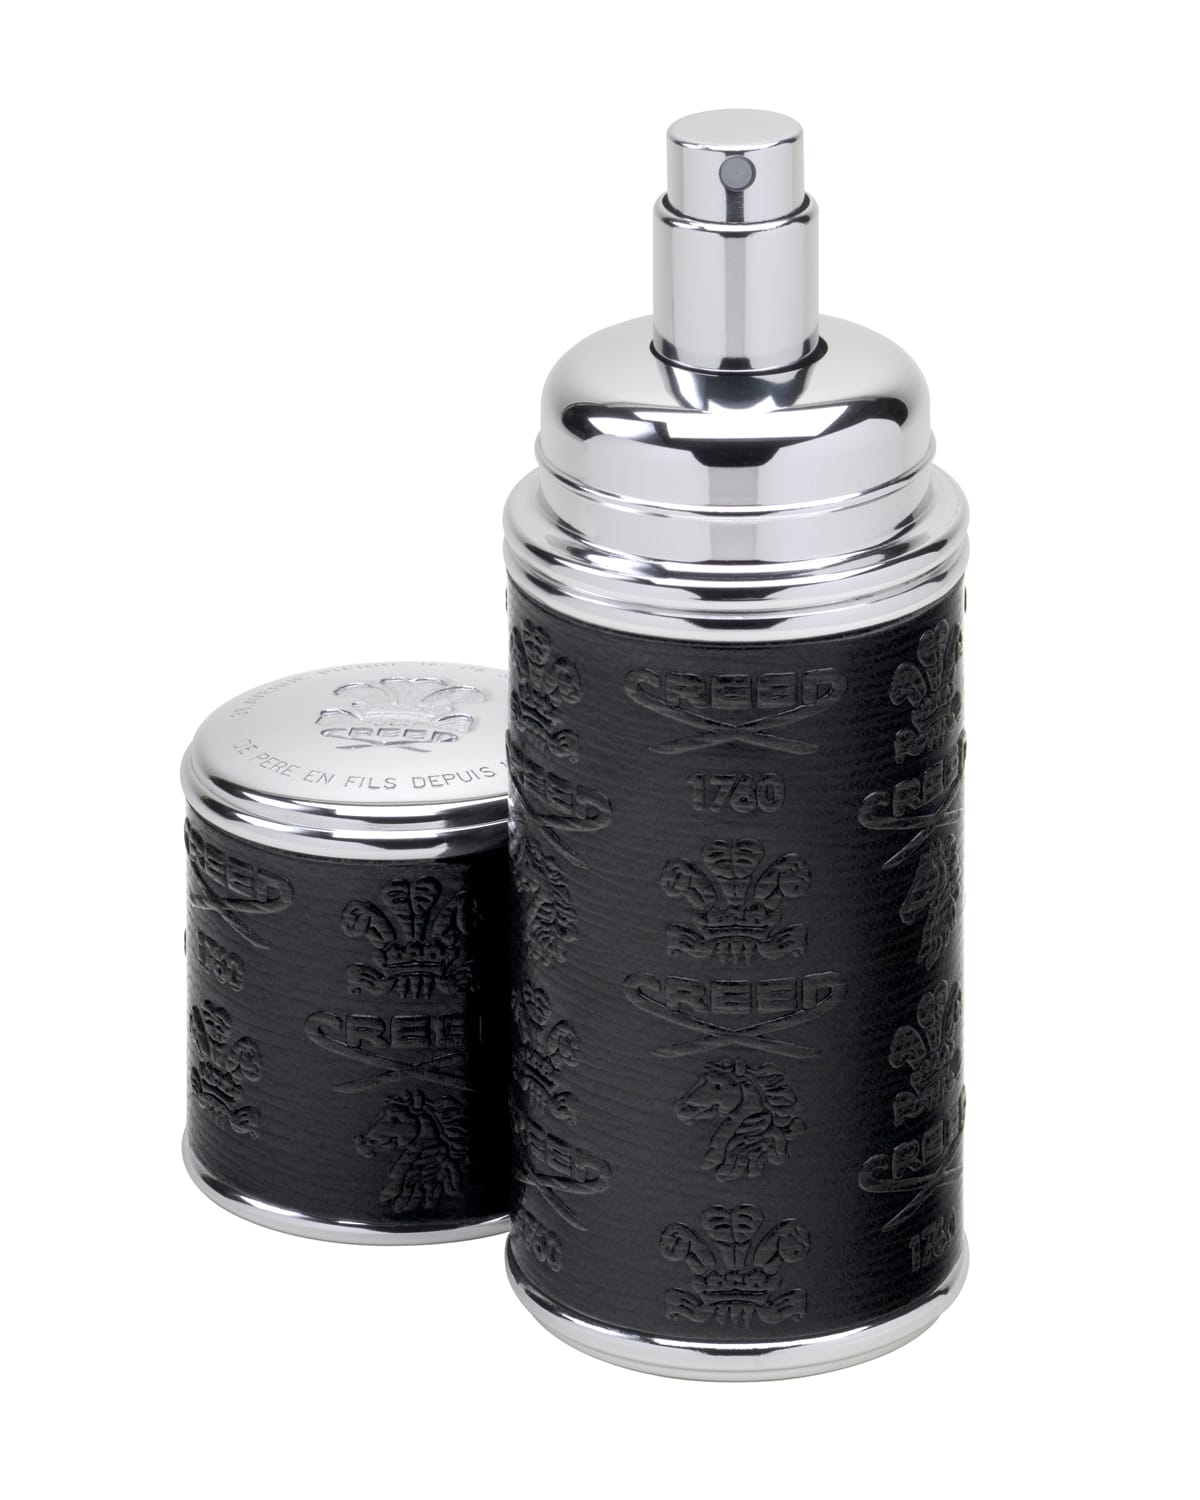 1.7 oz. Deluxe Atomizer, Black with Silver Trim